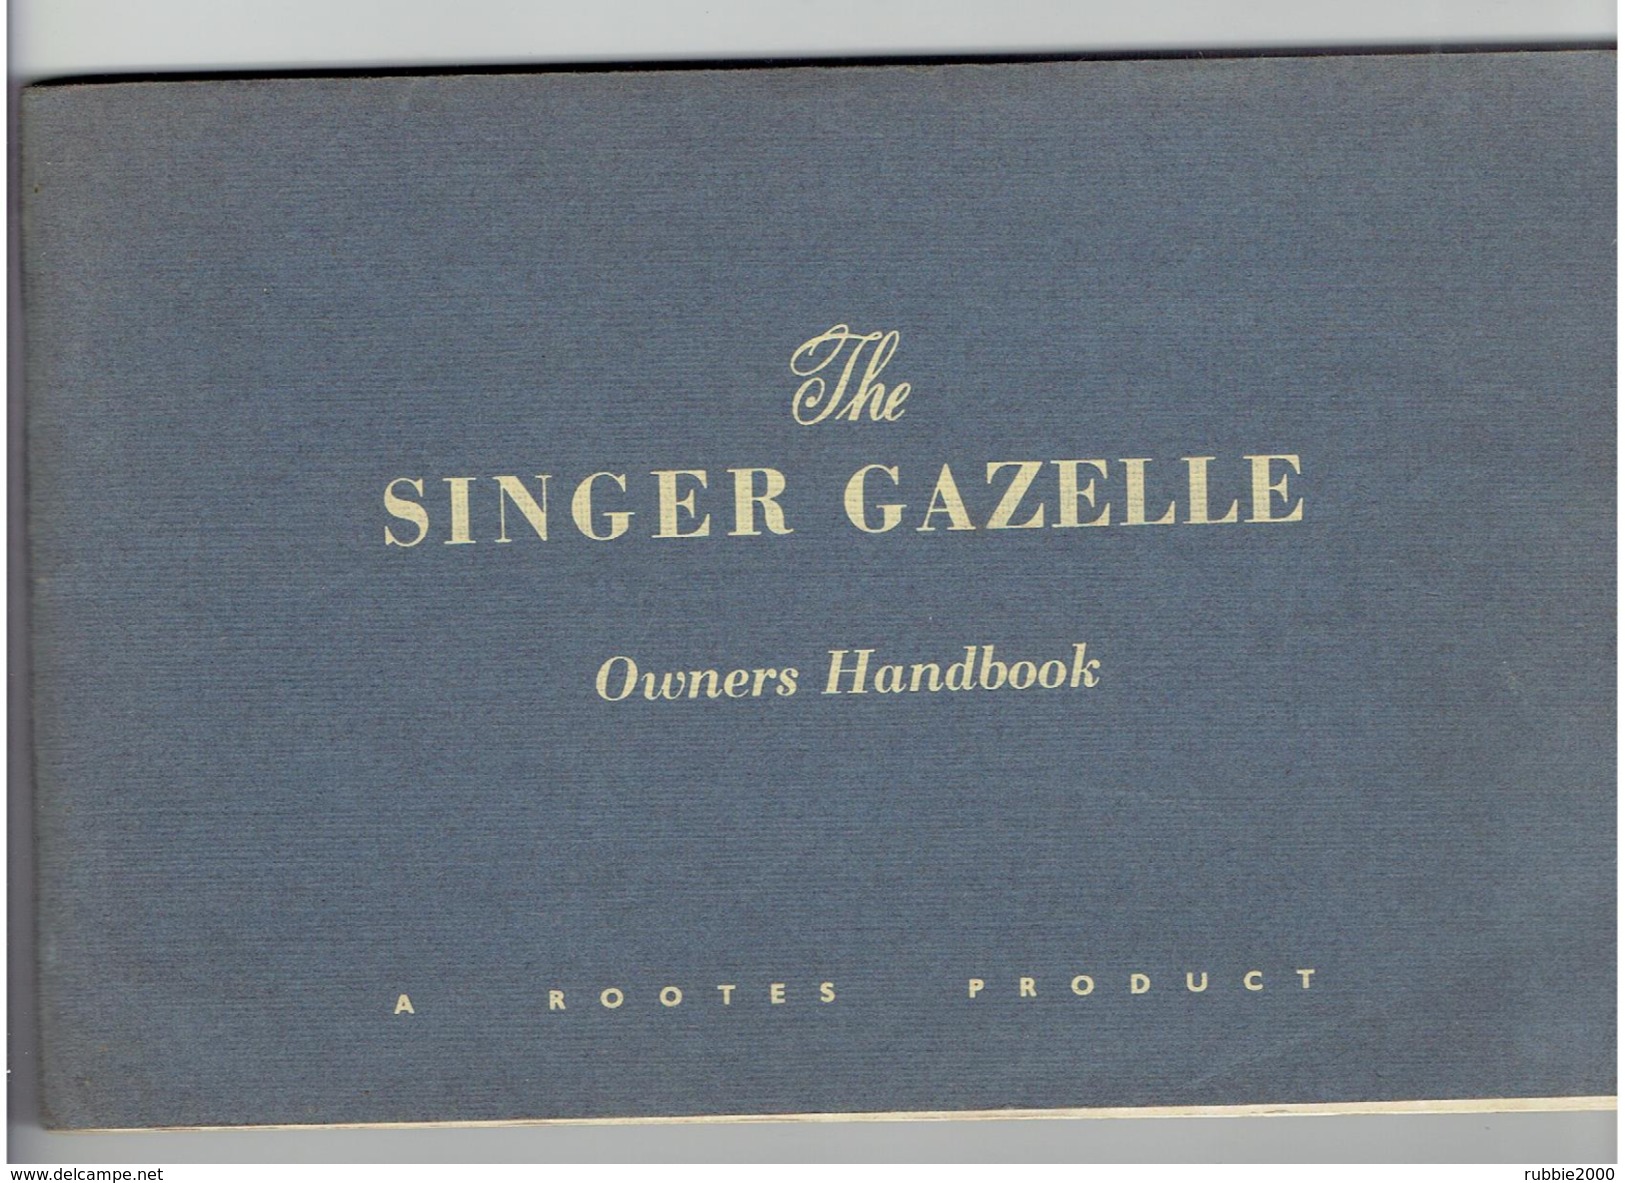 THE SINGER GAZELLE OWNERS HANDBOOK ISSUED 1958 SINGER MOTORS LIMITED COVENTRY ENGLAND A ROOTES PRODUCT - Transportation